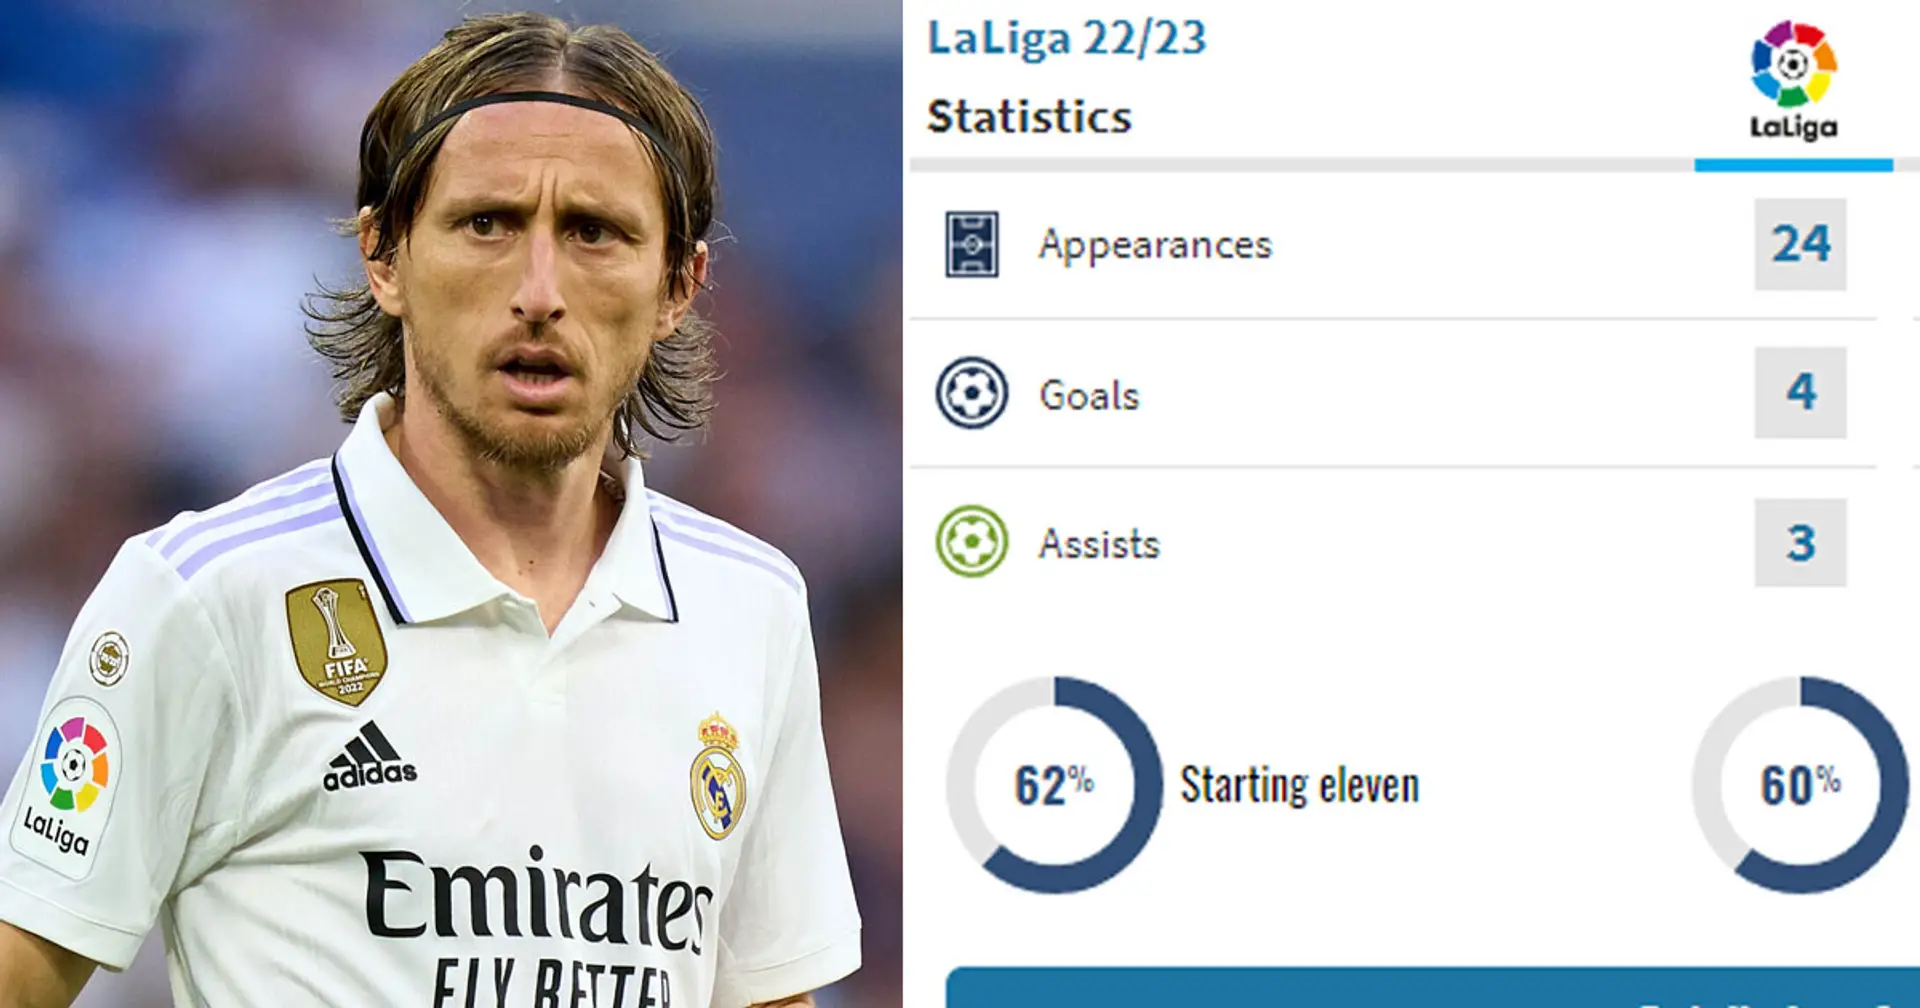 Modric ready to accept lesser role as he dreams of retiring at Real Madrid (reliability: 5 stars)